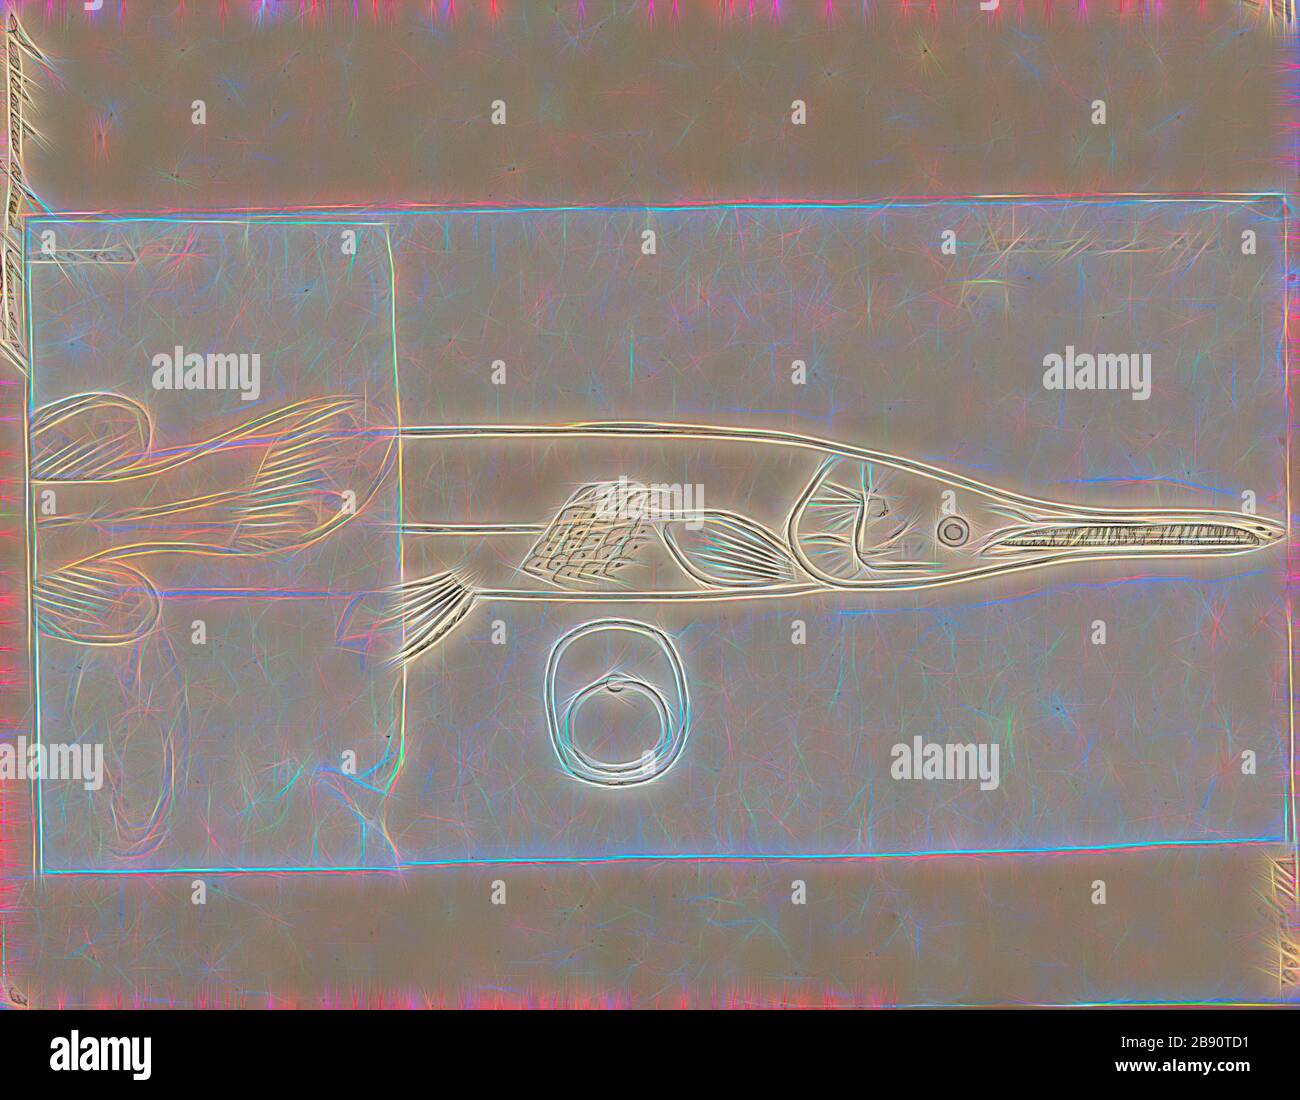 Lepisosteus osseus, Print, Longnose gar, 1700-1880, Reimagined by Gibon, design of warm cheerful glowing of brightness and light rays radiance. Classic art reinvented with a modern twist. Photography inspired by futurism, embracing dynamic energy of modern technology, movement, speed and revolutionize culture. Stock Photo